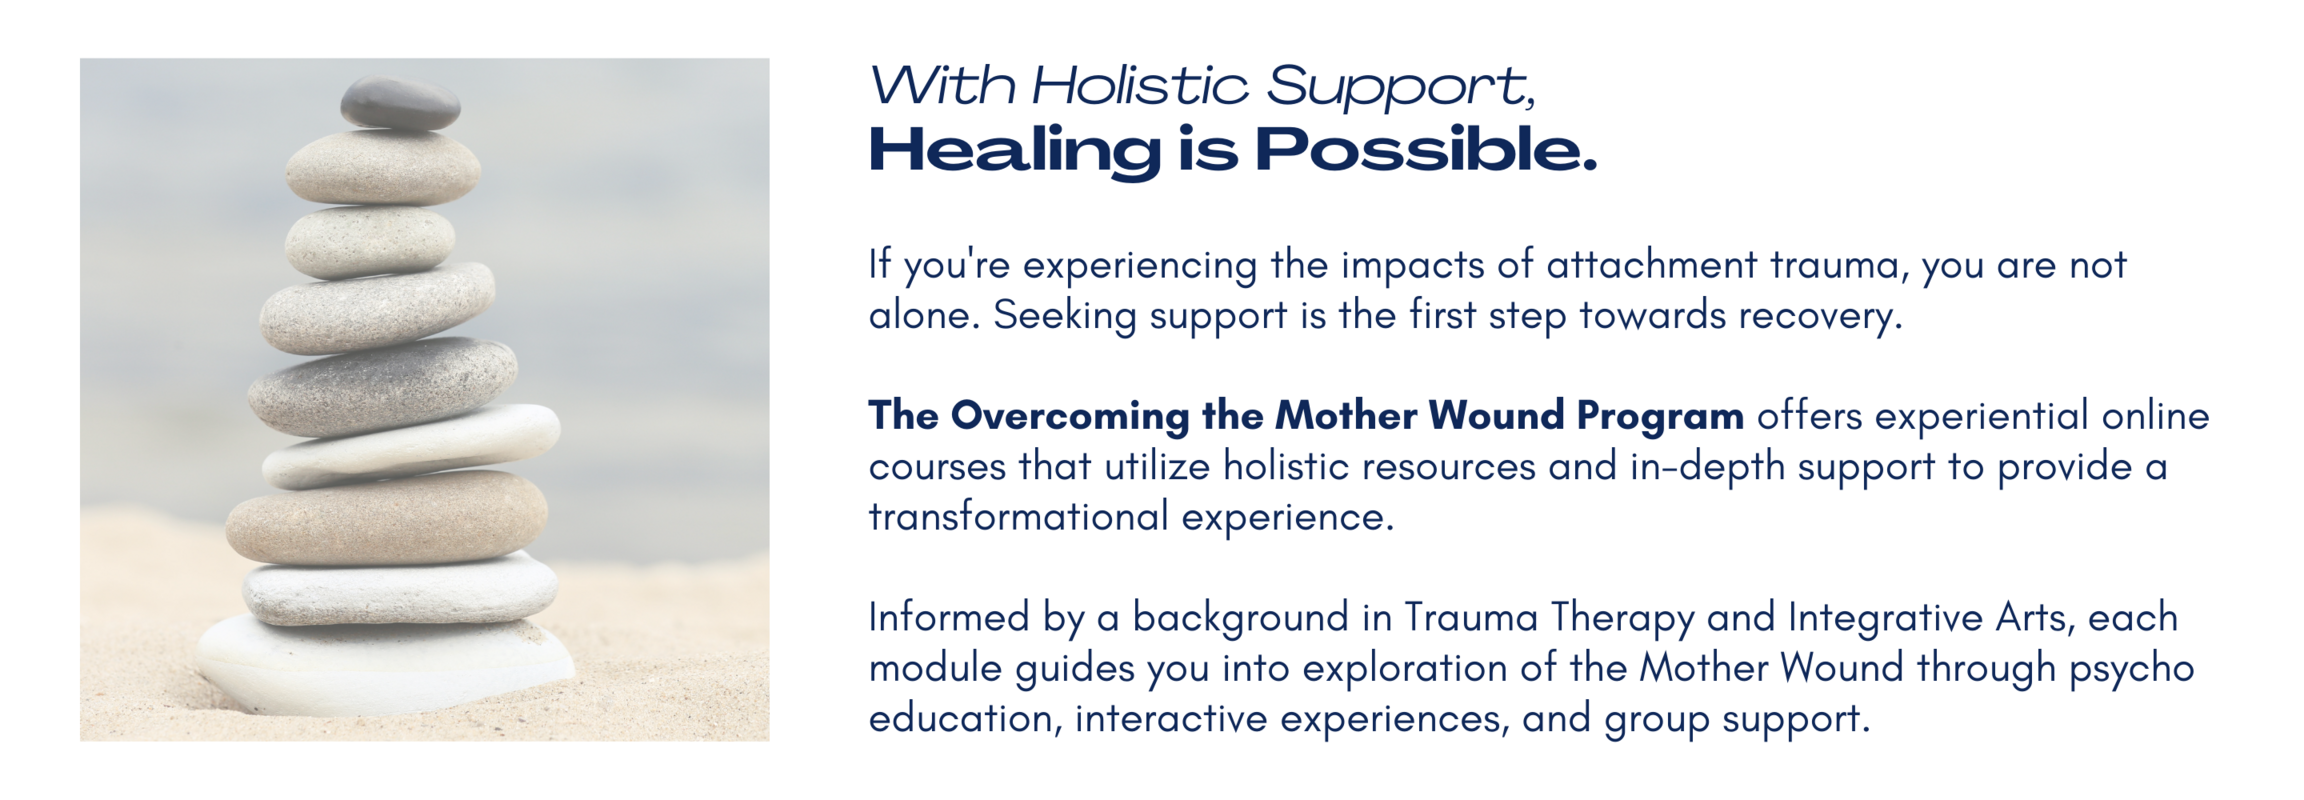 With Holistic Support, Healing is Possible